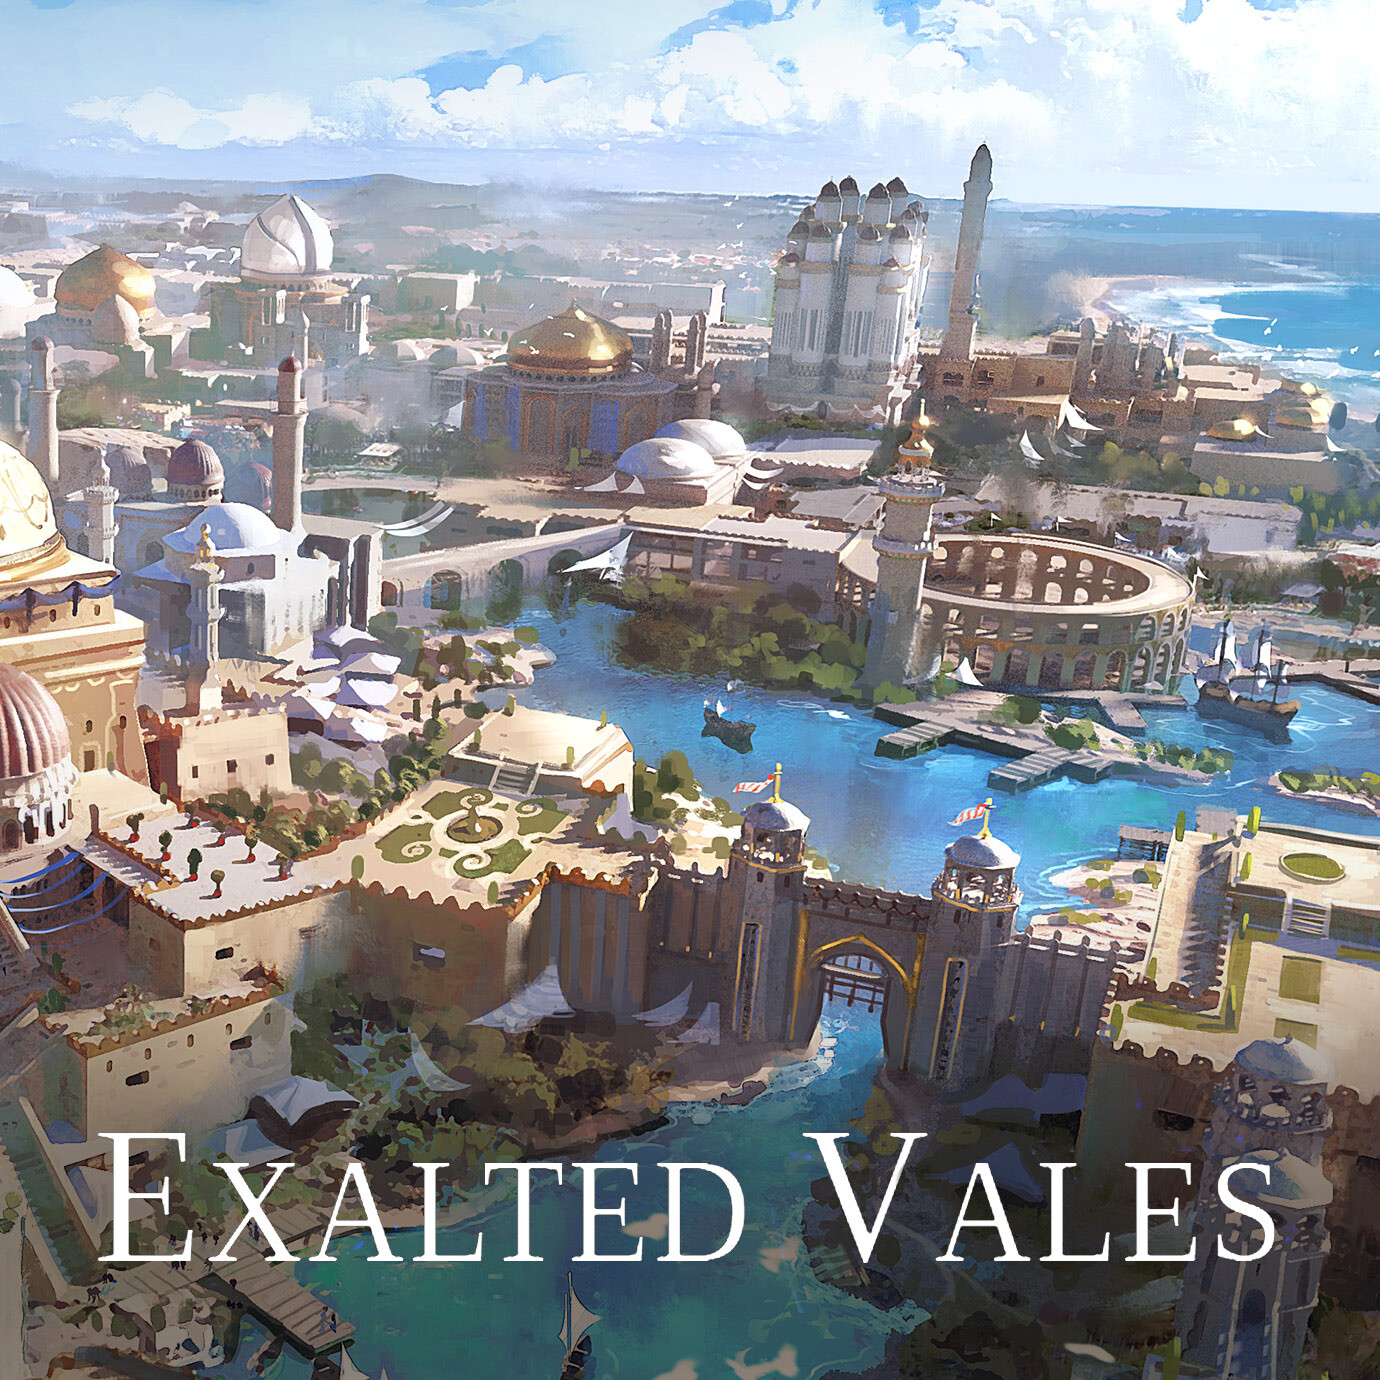 Exalted vales - City Overview